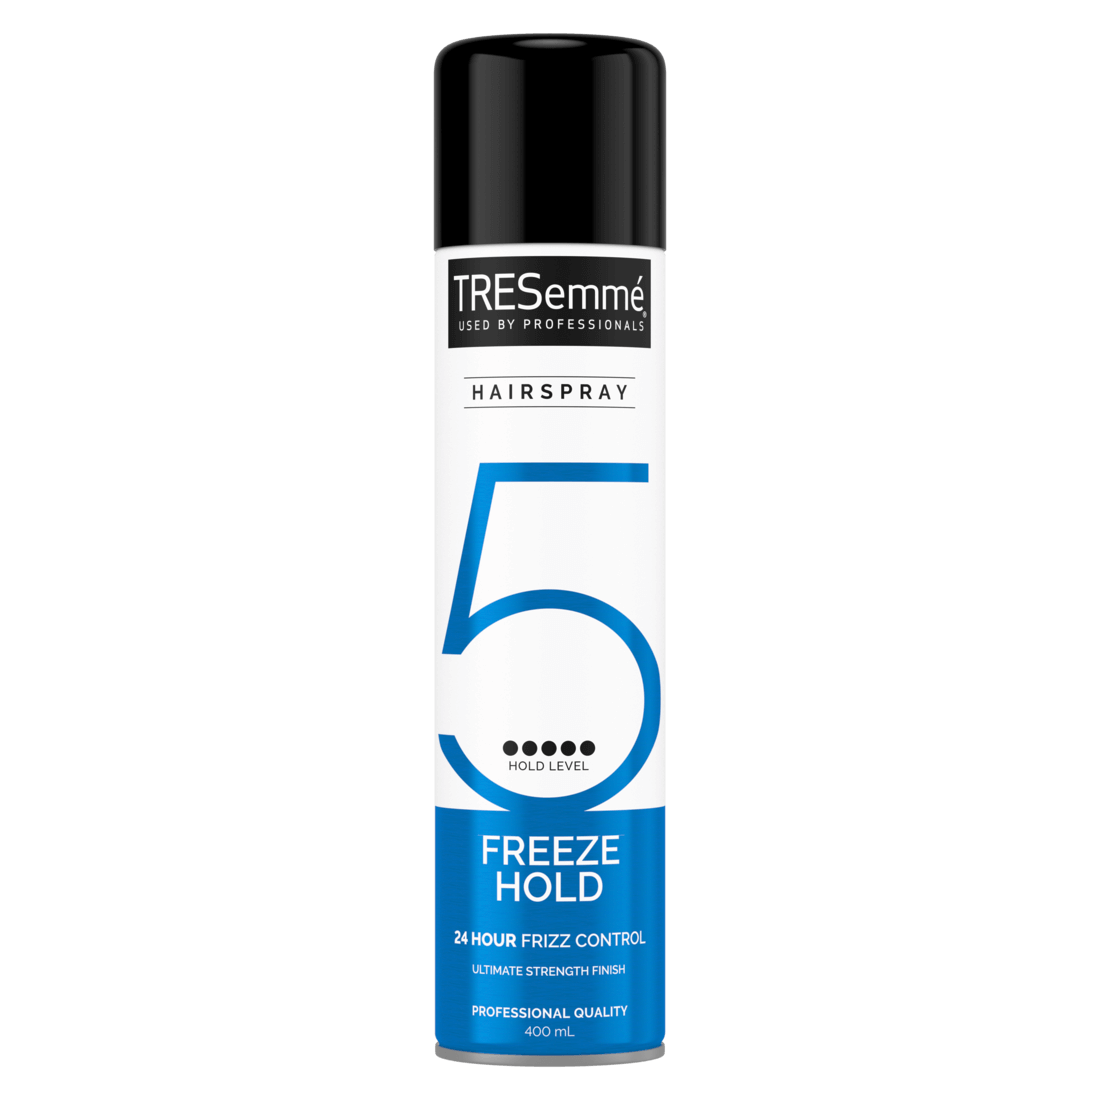 A 400ml can of TRESemmé Freeze Hold Hairspray front of pack image